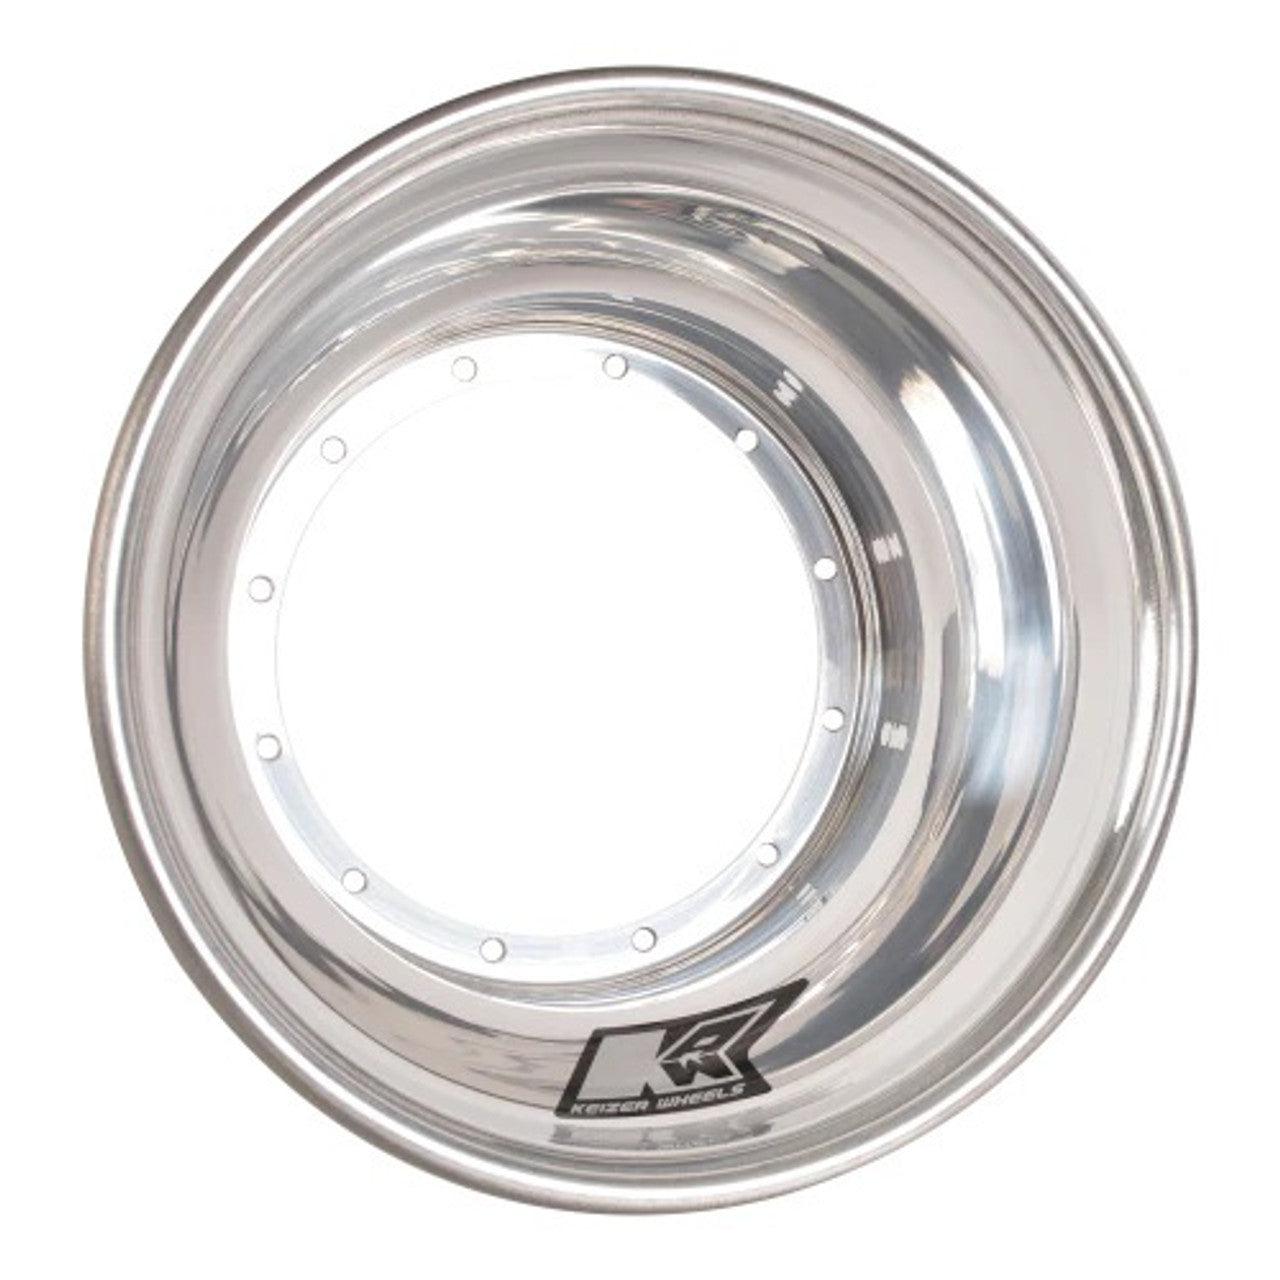 Wheel Half 12-Blt 10in x 5in Polished - Burlile Performance Products